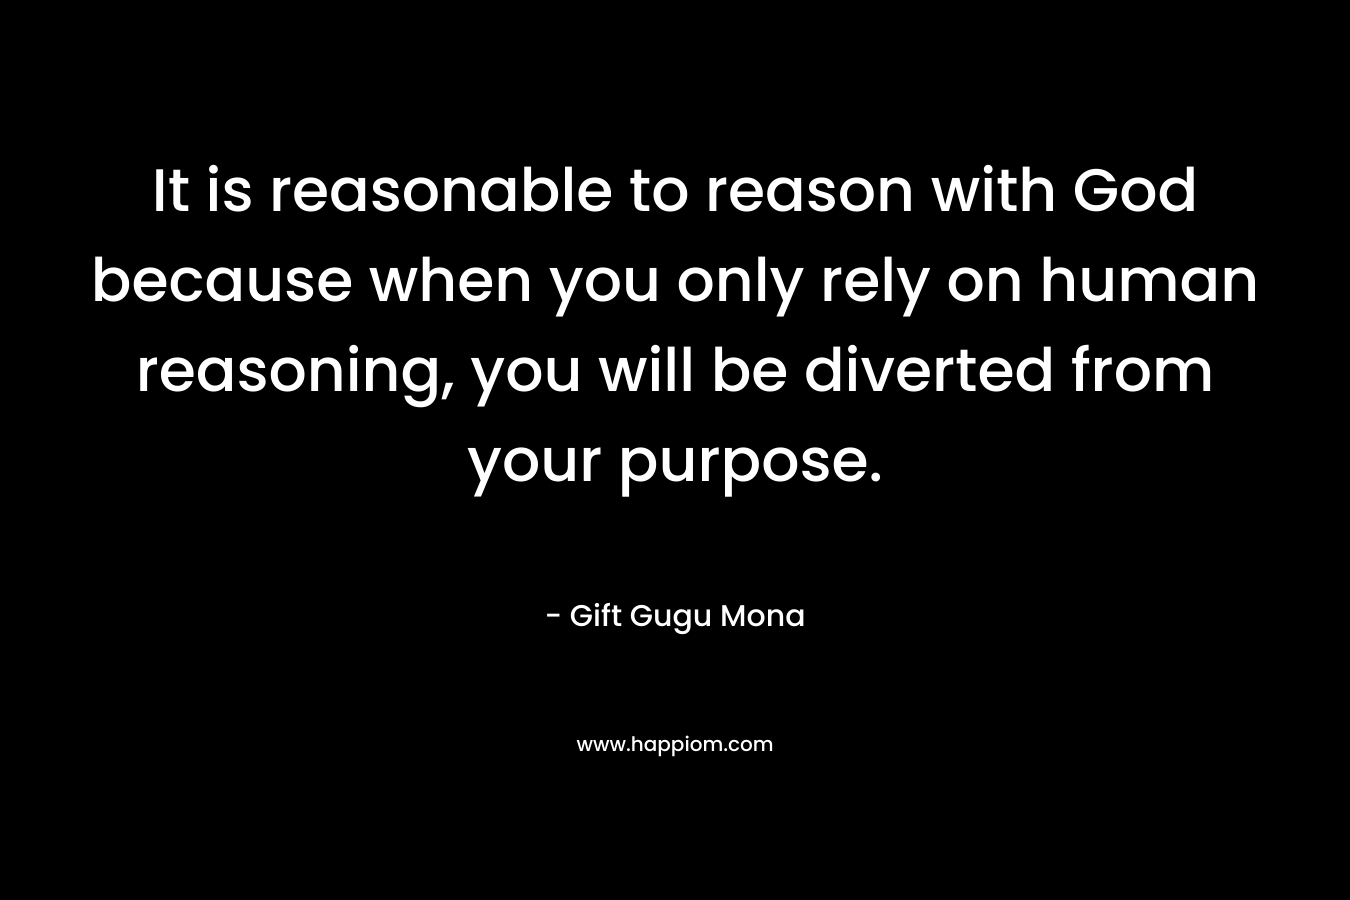 It is reasonable to reason with God because when you only rely on human reasoning, you will be diverted from your purpose.